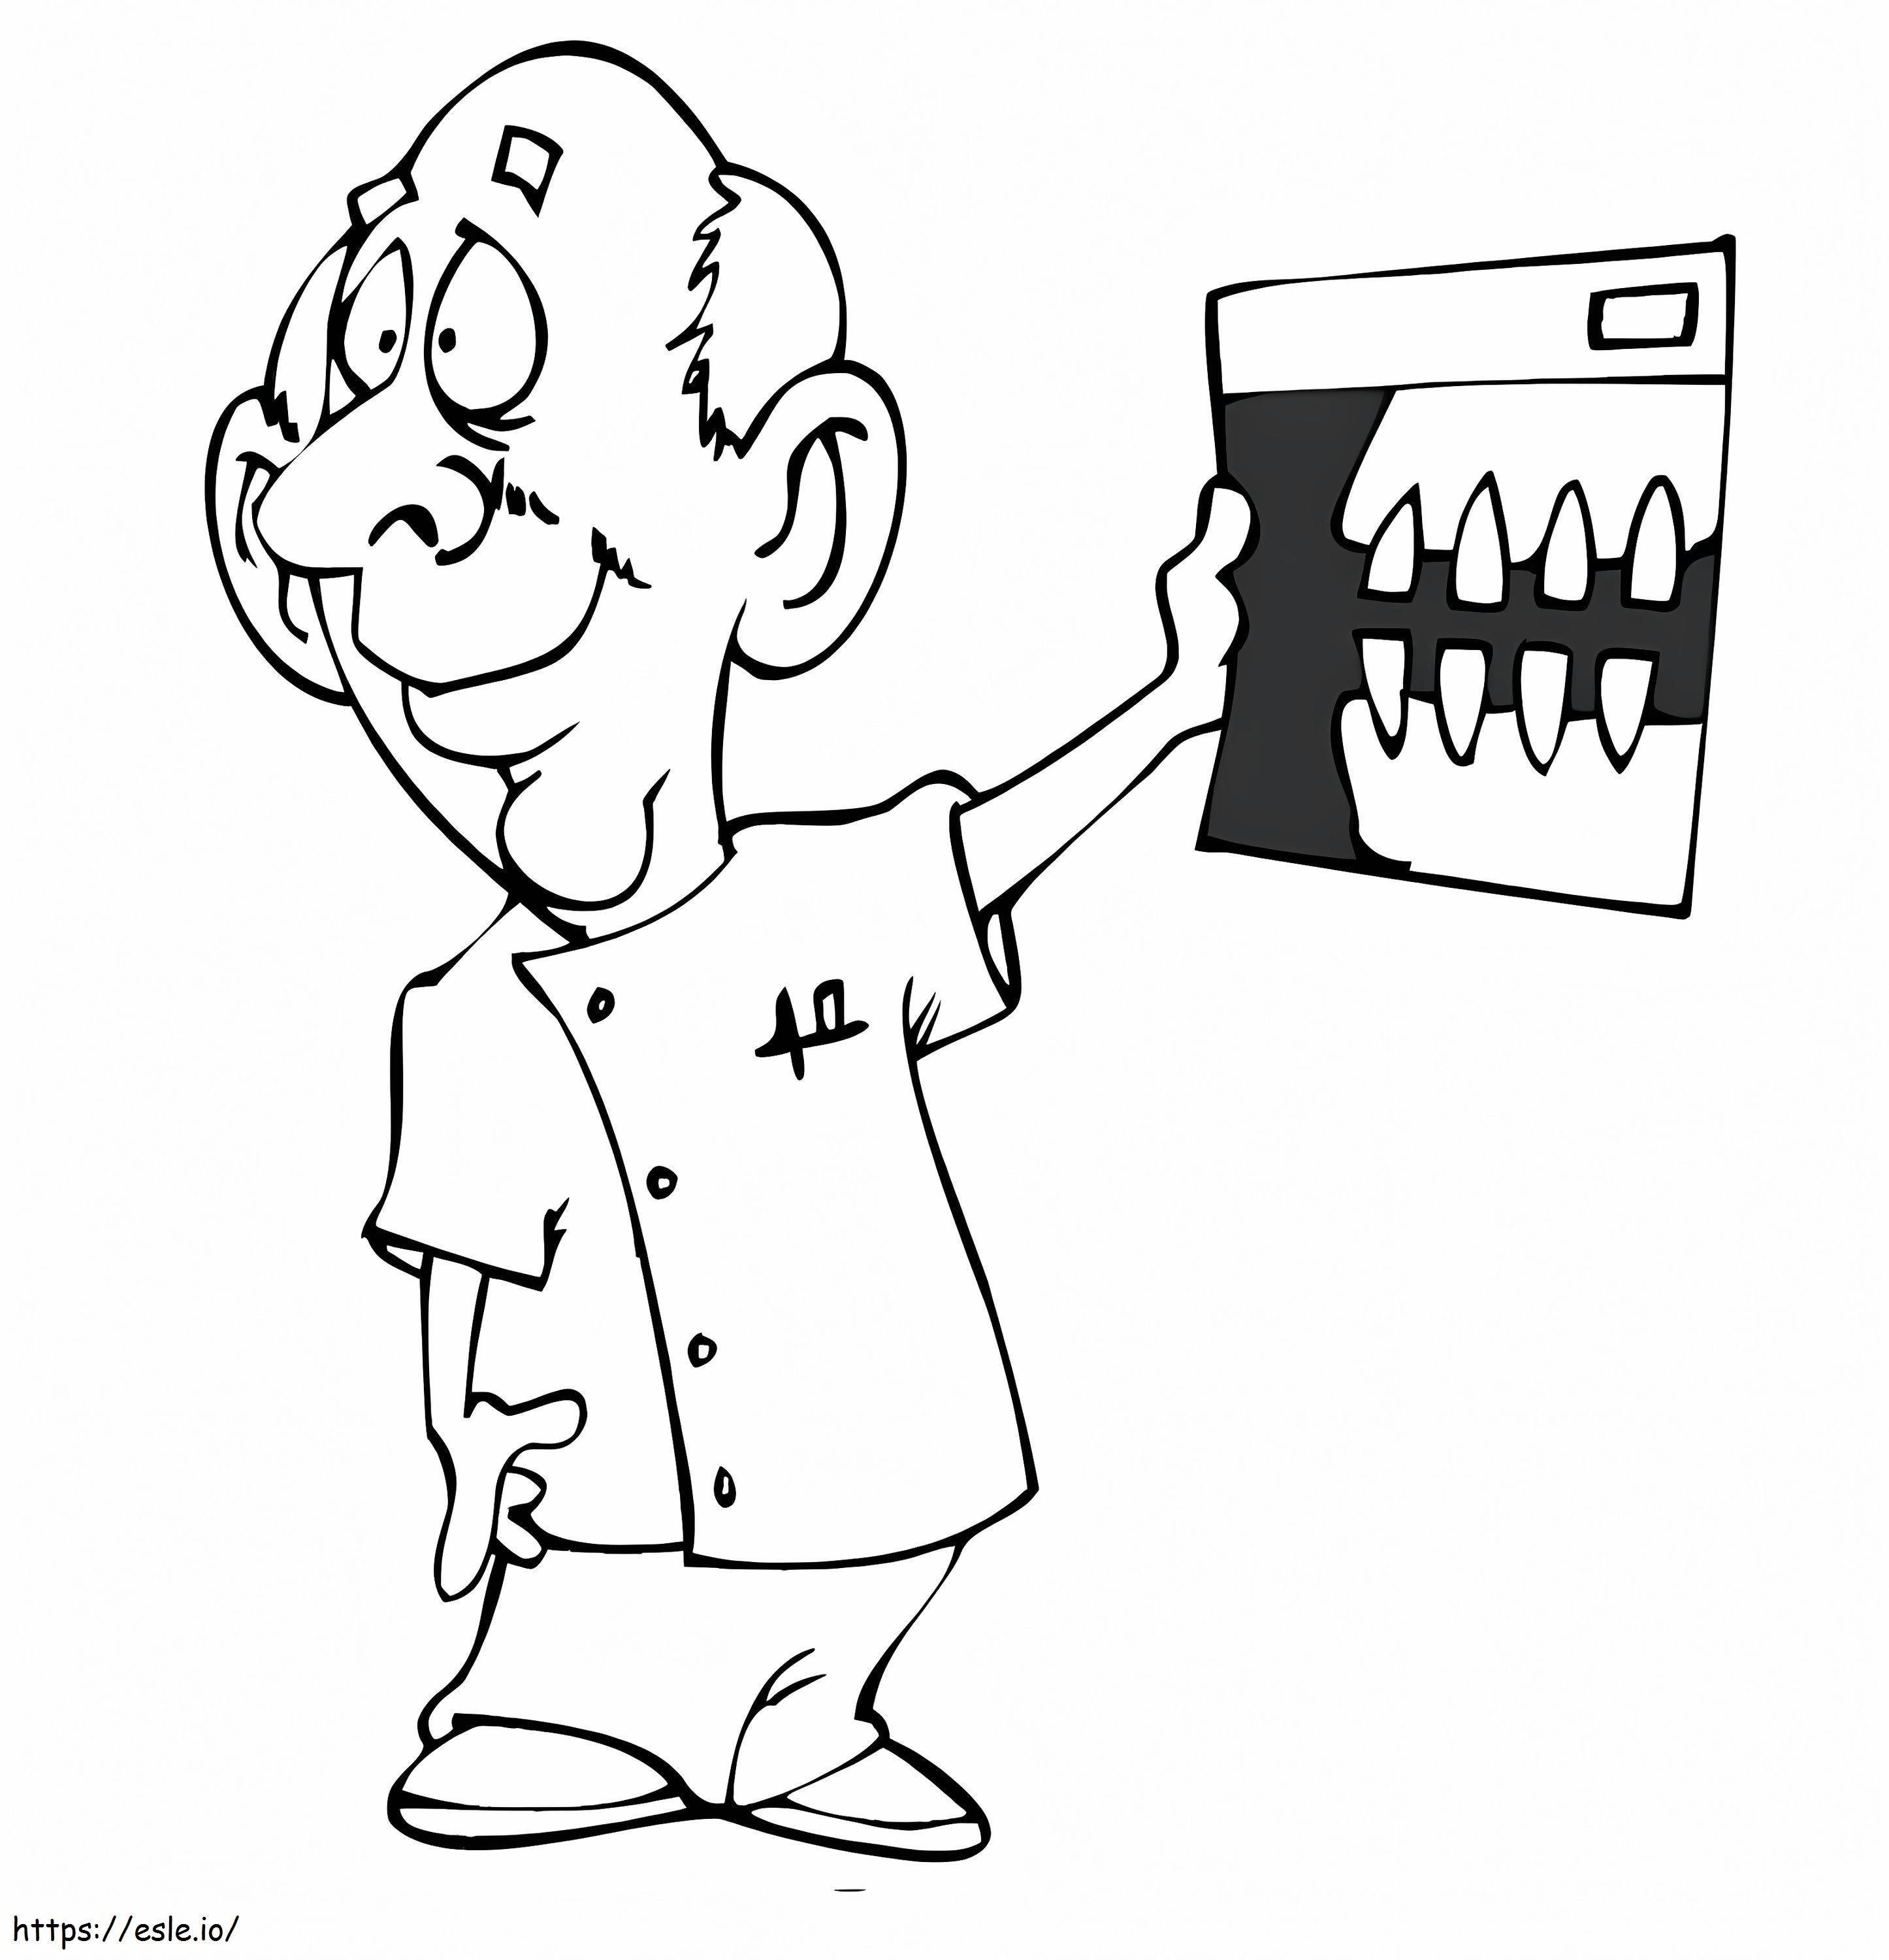 Dentist 2 coloring page